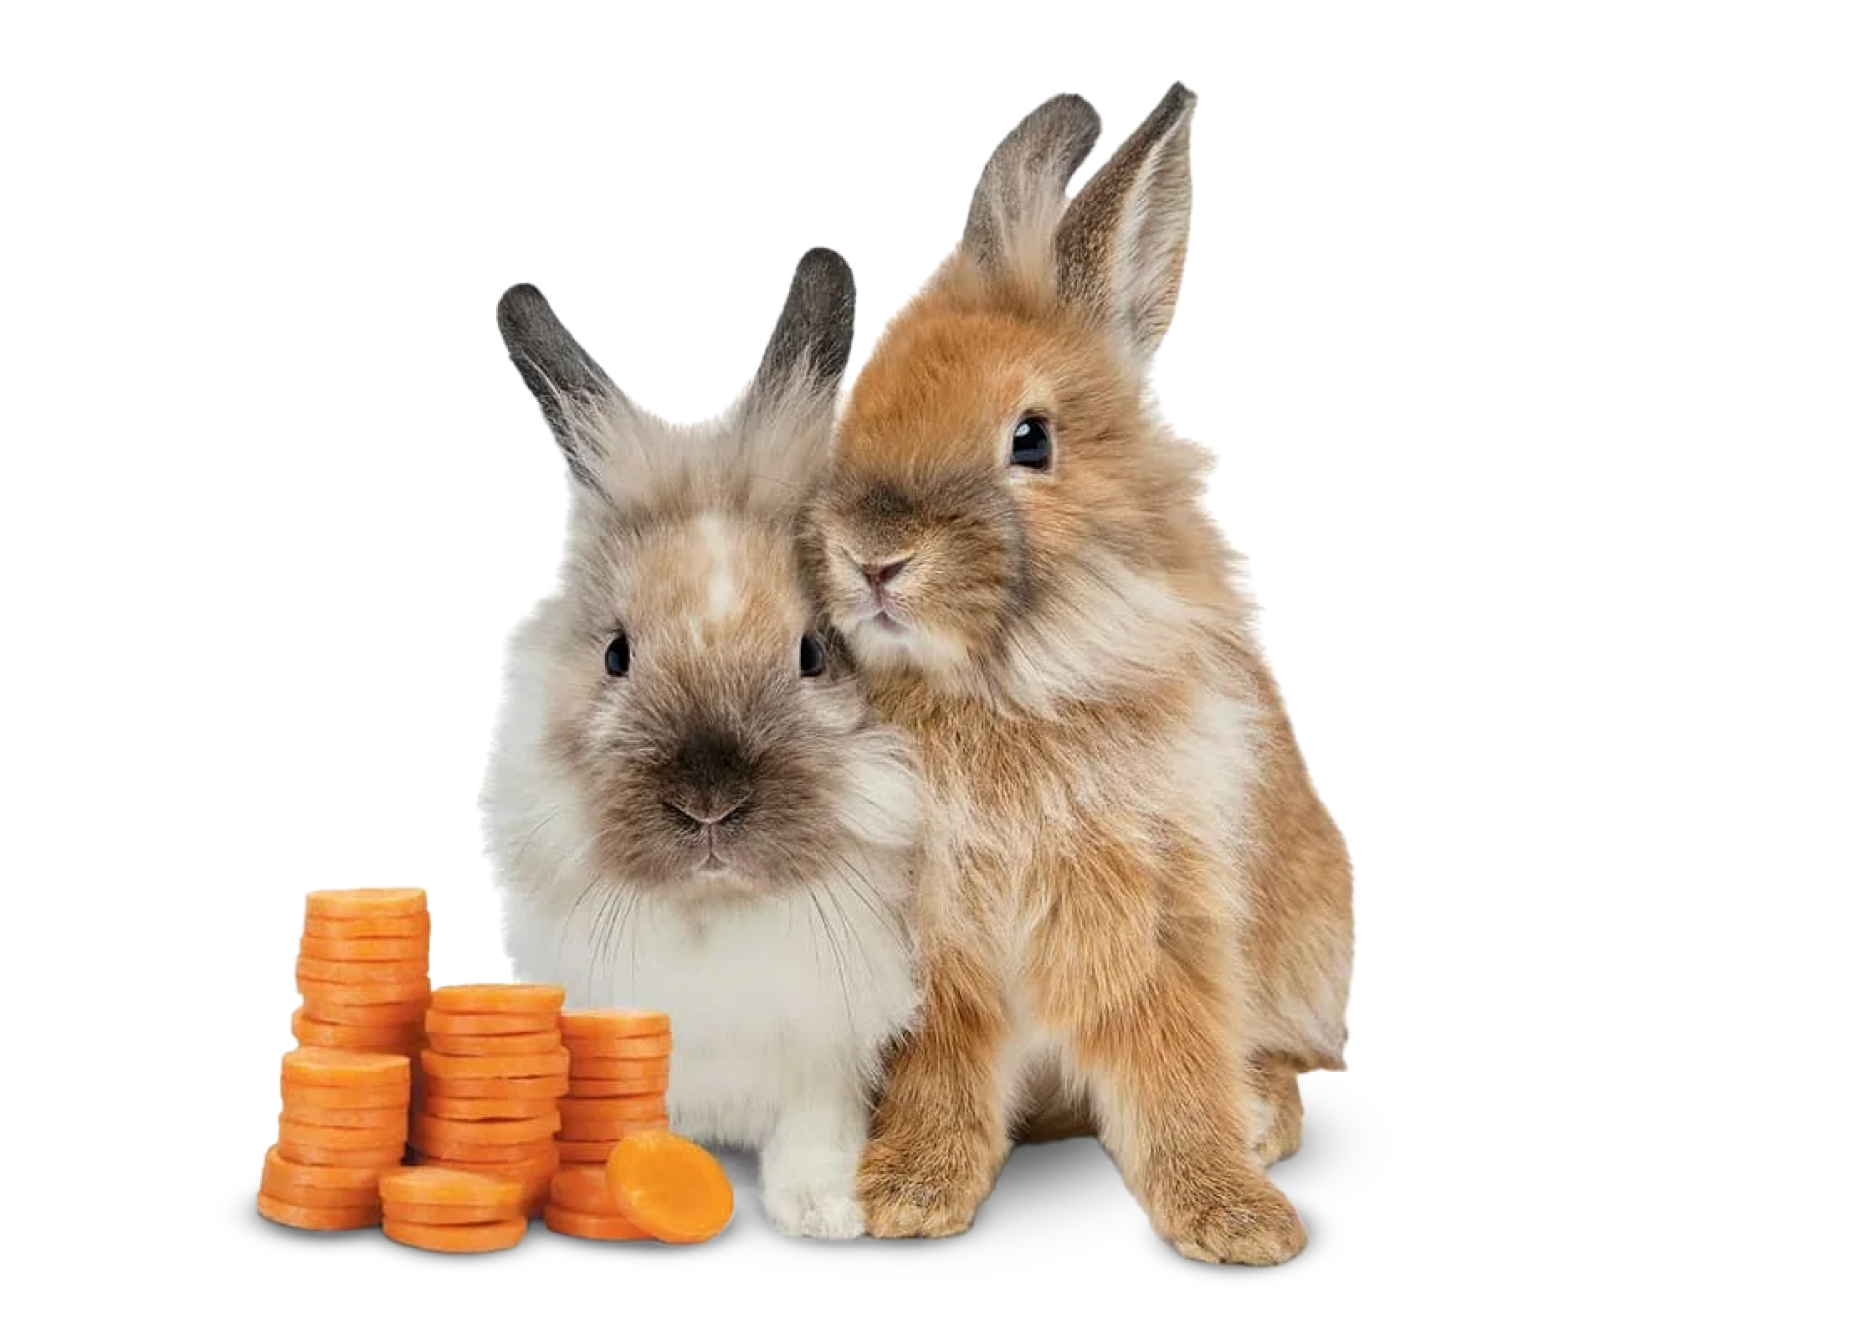 Two TELUS bunnies standing beside a stack of coins